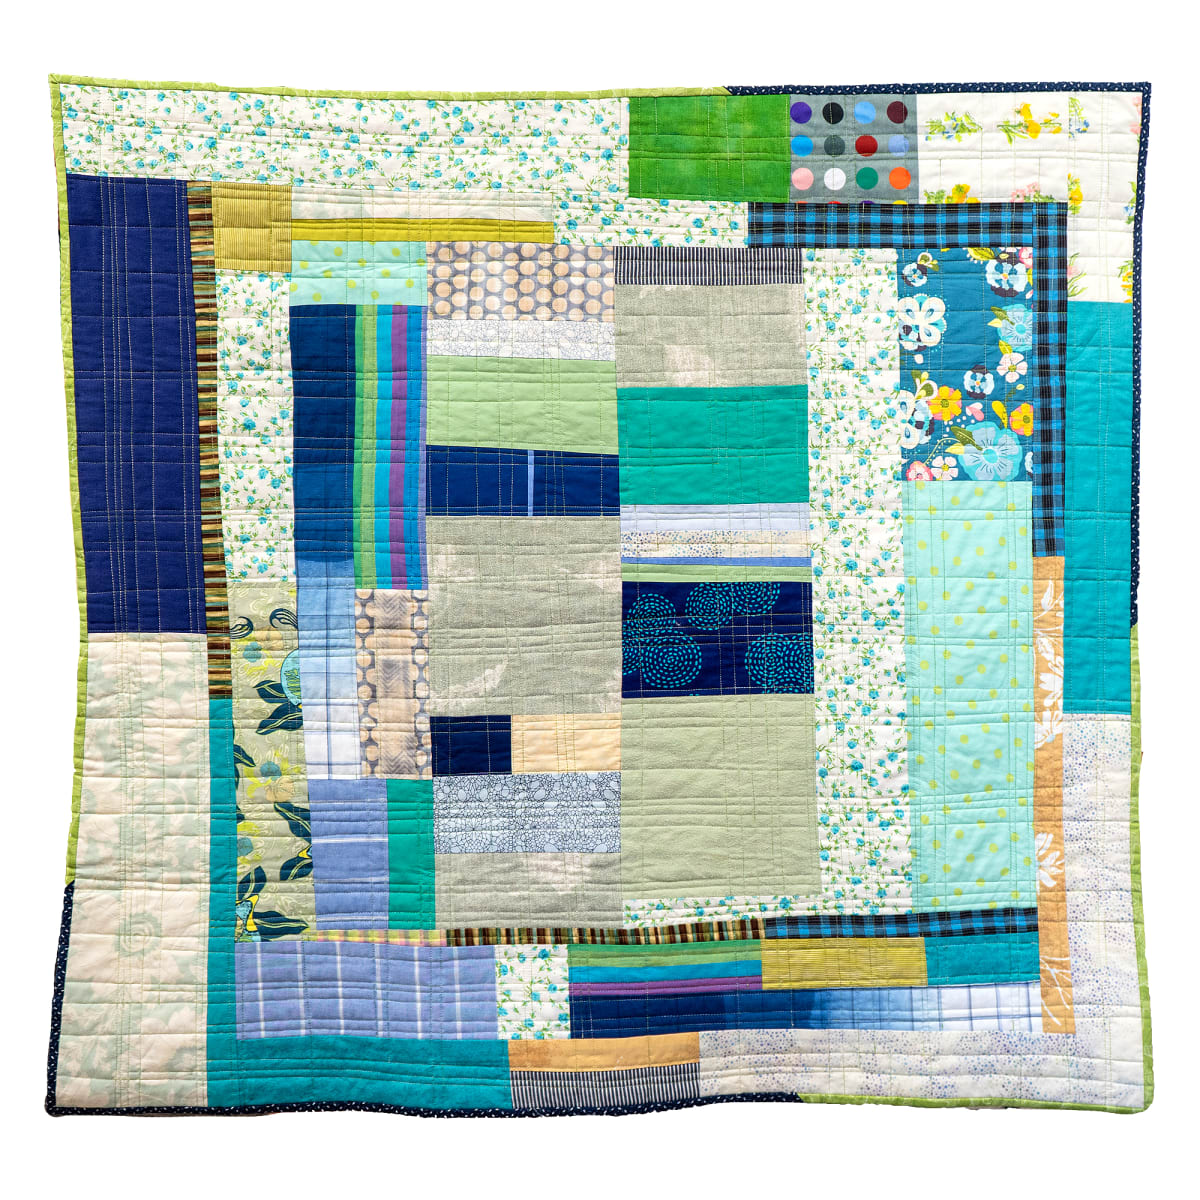 Fallow Fields by Sarah Atlee  Image: Reclaimed garments, reclaimed linens, hand-dyed cotton, and other fabrics, machine pieced and quilted. 39”h x 41”w. Wall-hanging or functional quilt - safe for washer & dryer. Comes with hanging sleeve.